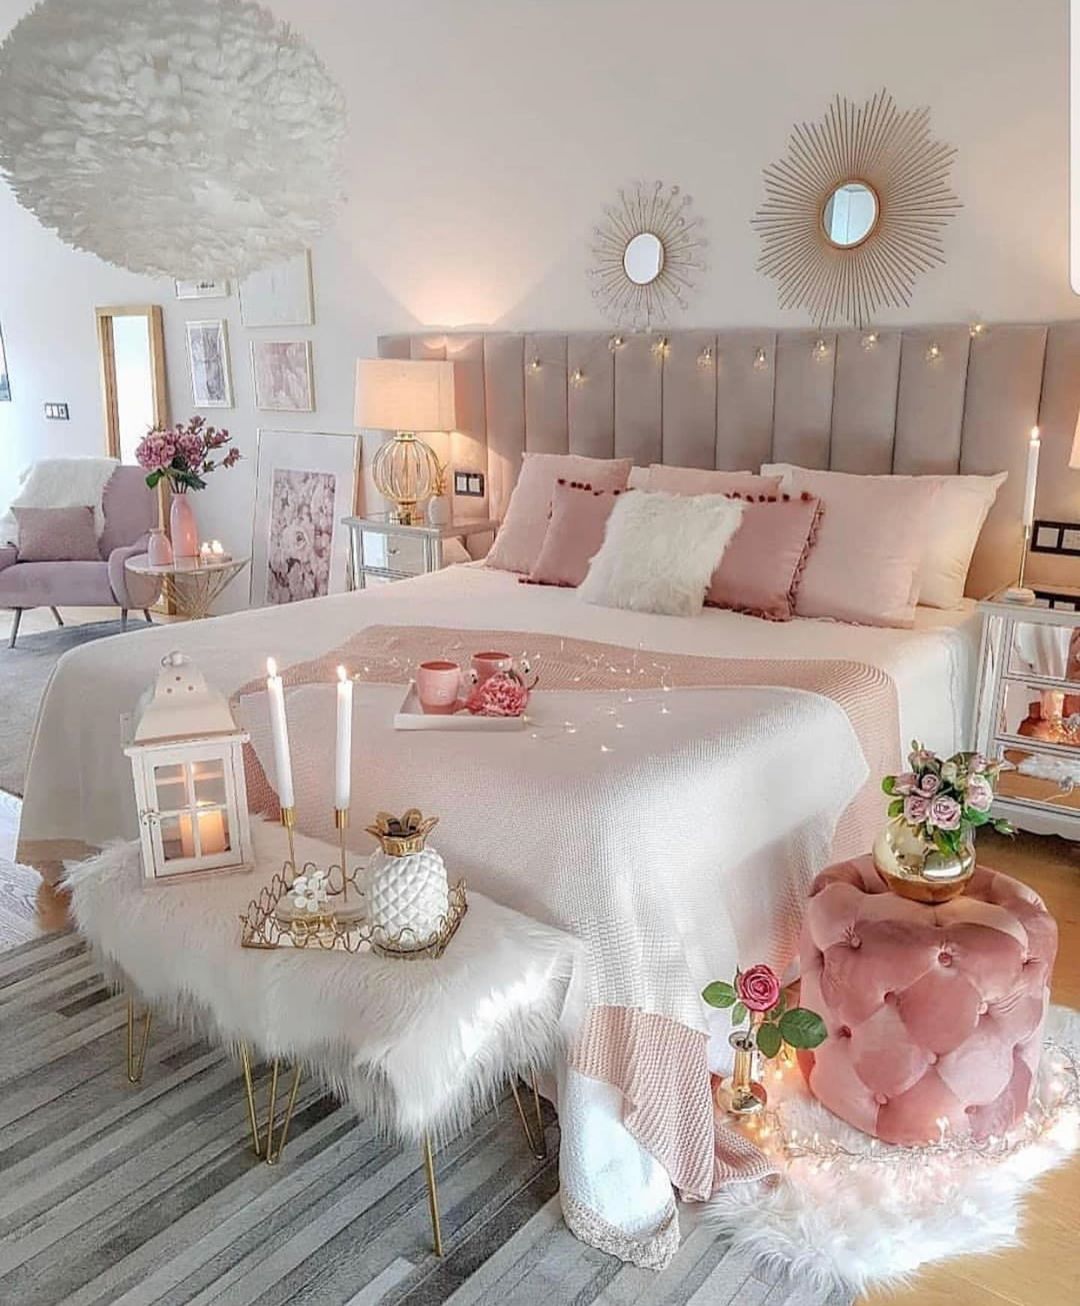 Pink and grey bedroom